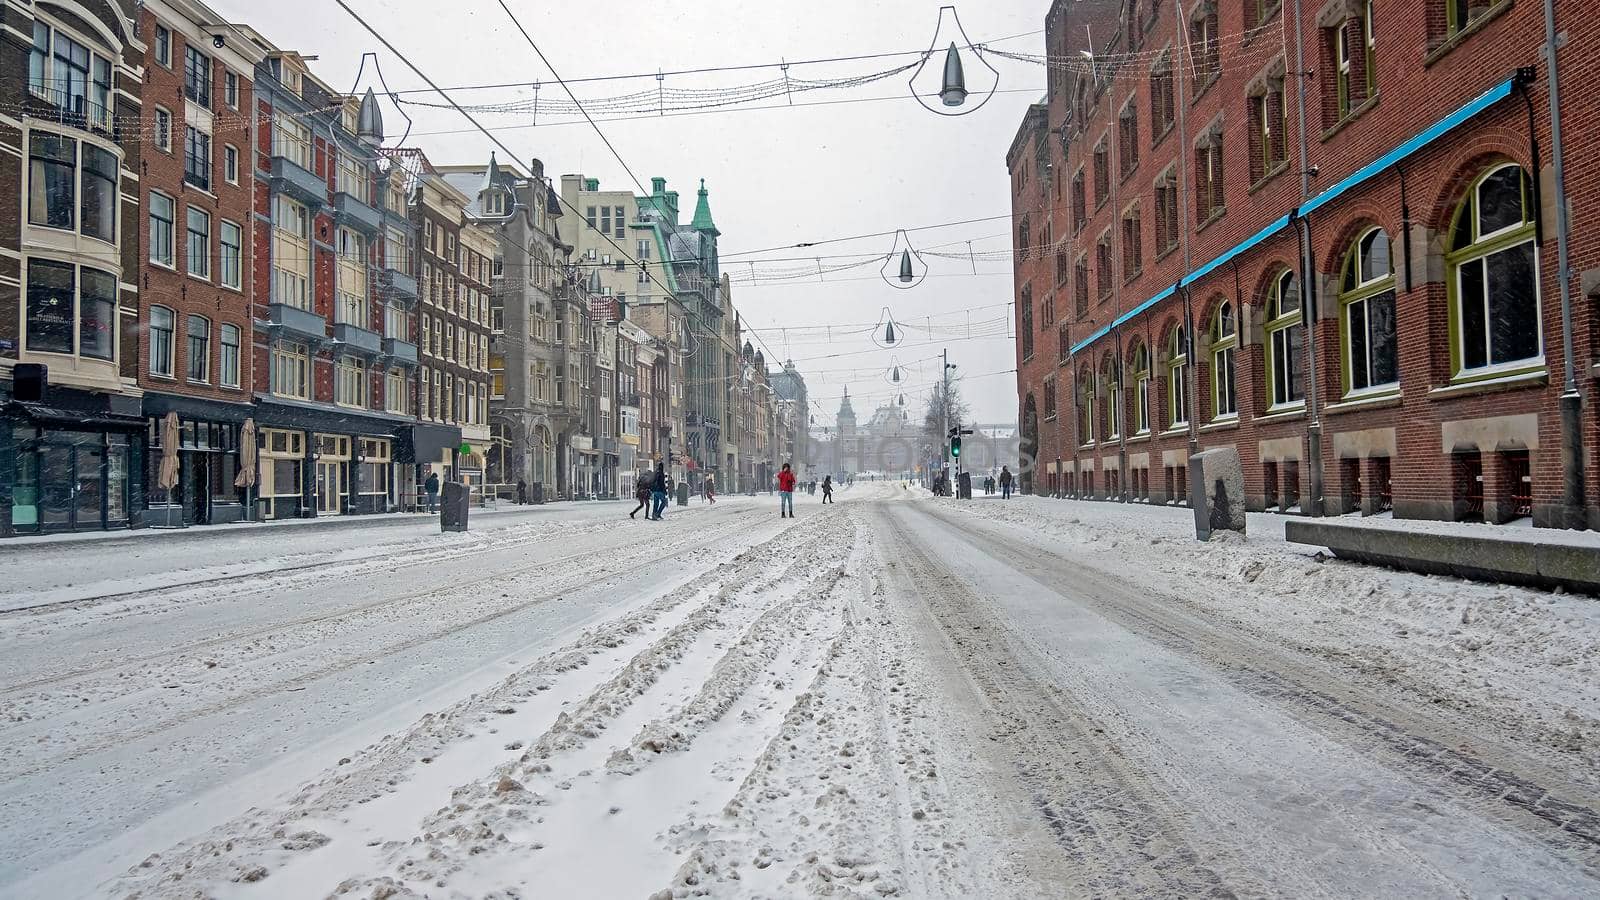 Snowy city Amsterdam at the Damrak in winter in the Netherlands by devy